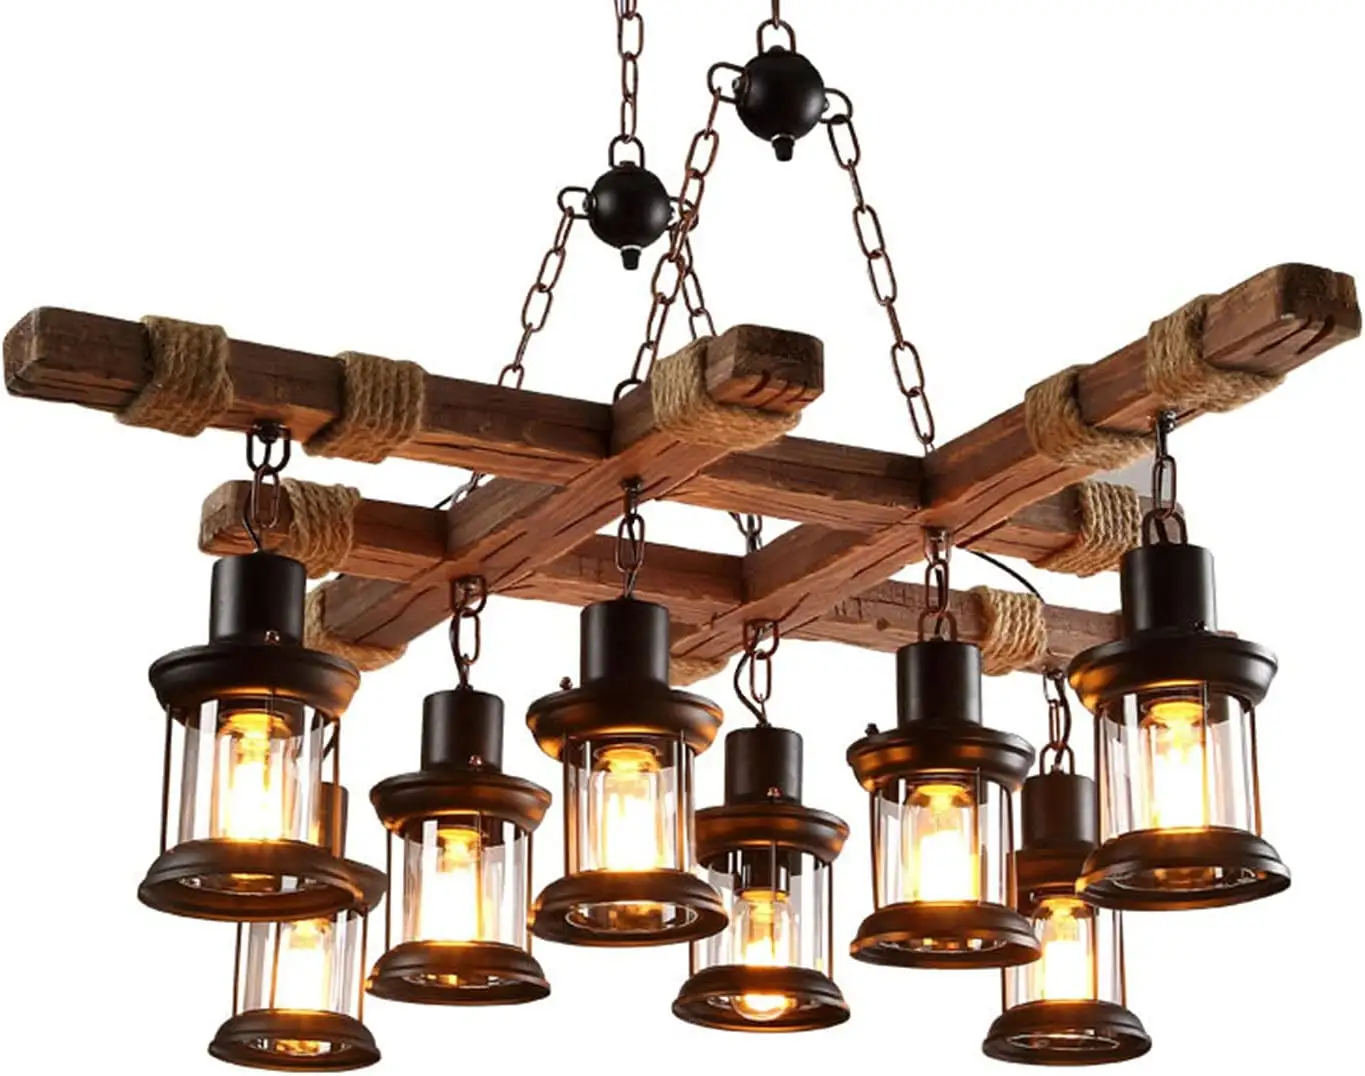 Country Coffee Bar Clothing Store Creative Personality Lamp Retro Industrial Wind Chandelier Designer Nordic Led Pendant Light